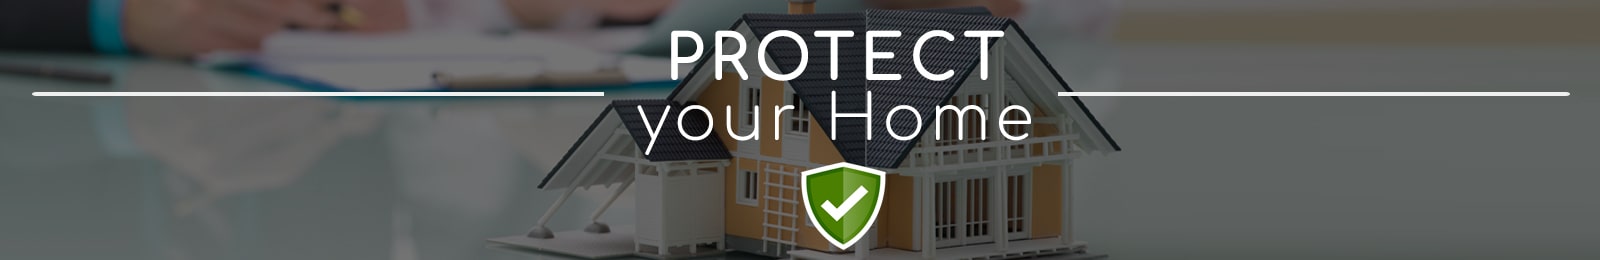 protect your home